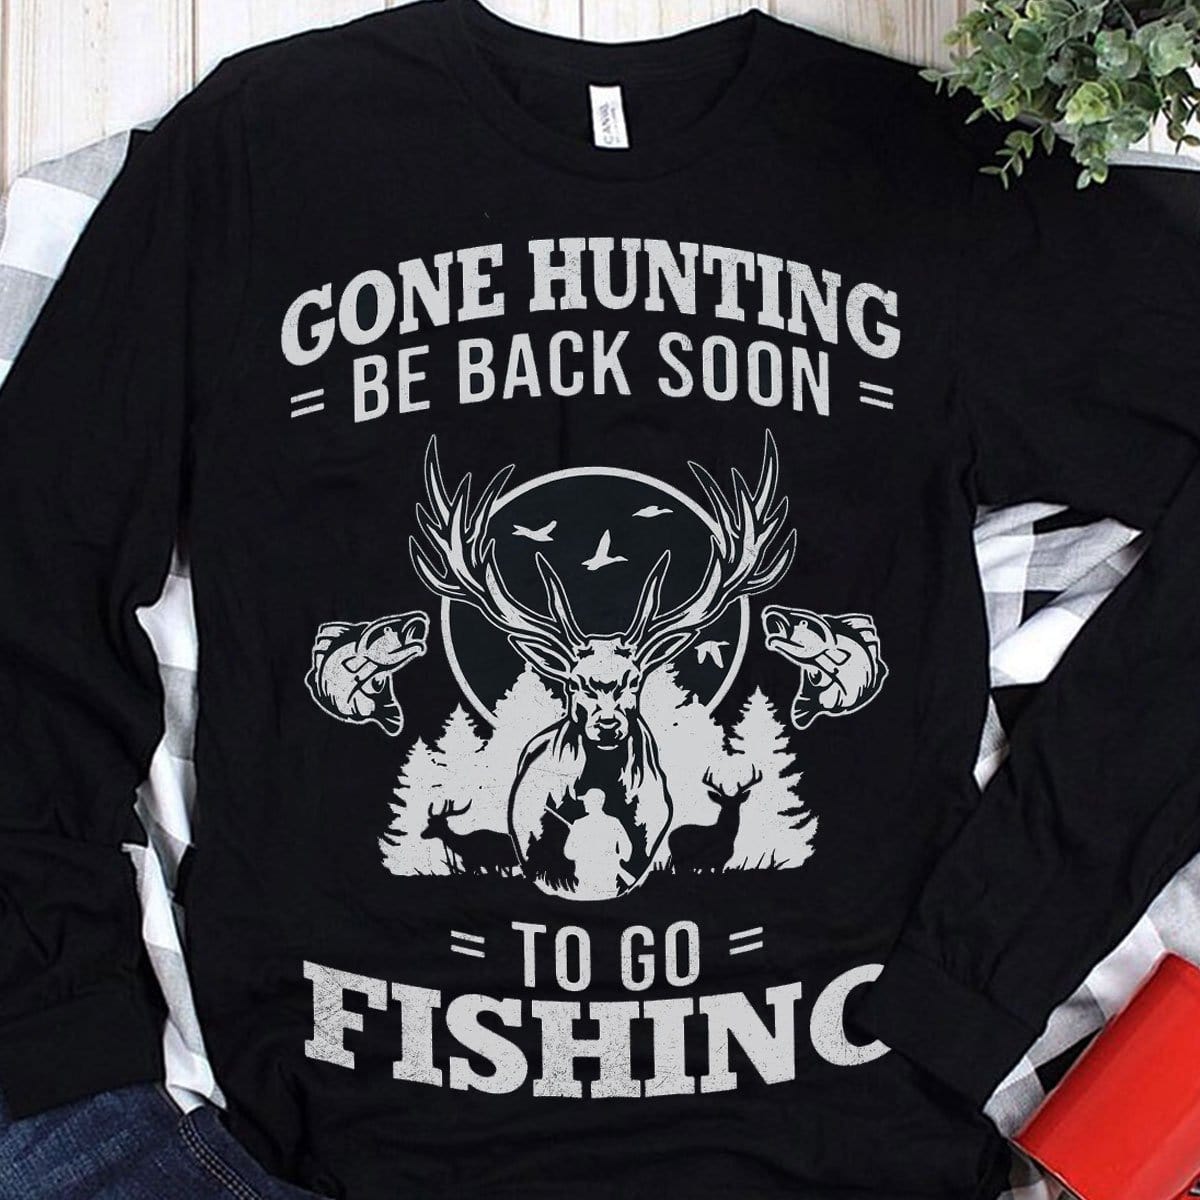 Hunting and Fishing Shirts, Deer Hunting Hoodies, Gone Hunting Be Back Soon to Go Fishing Shirts for Men